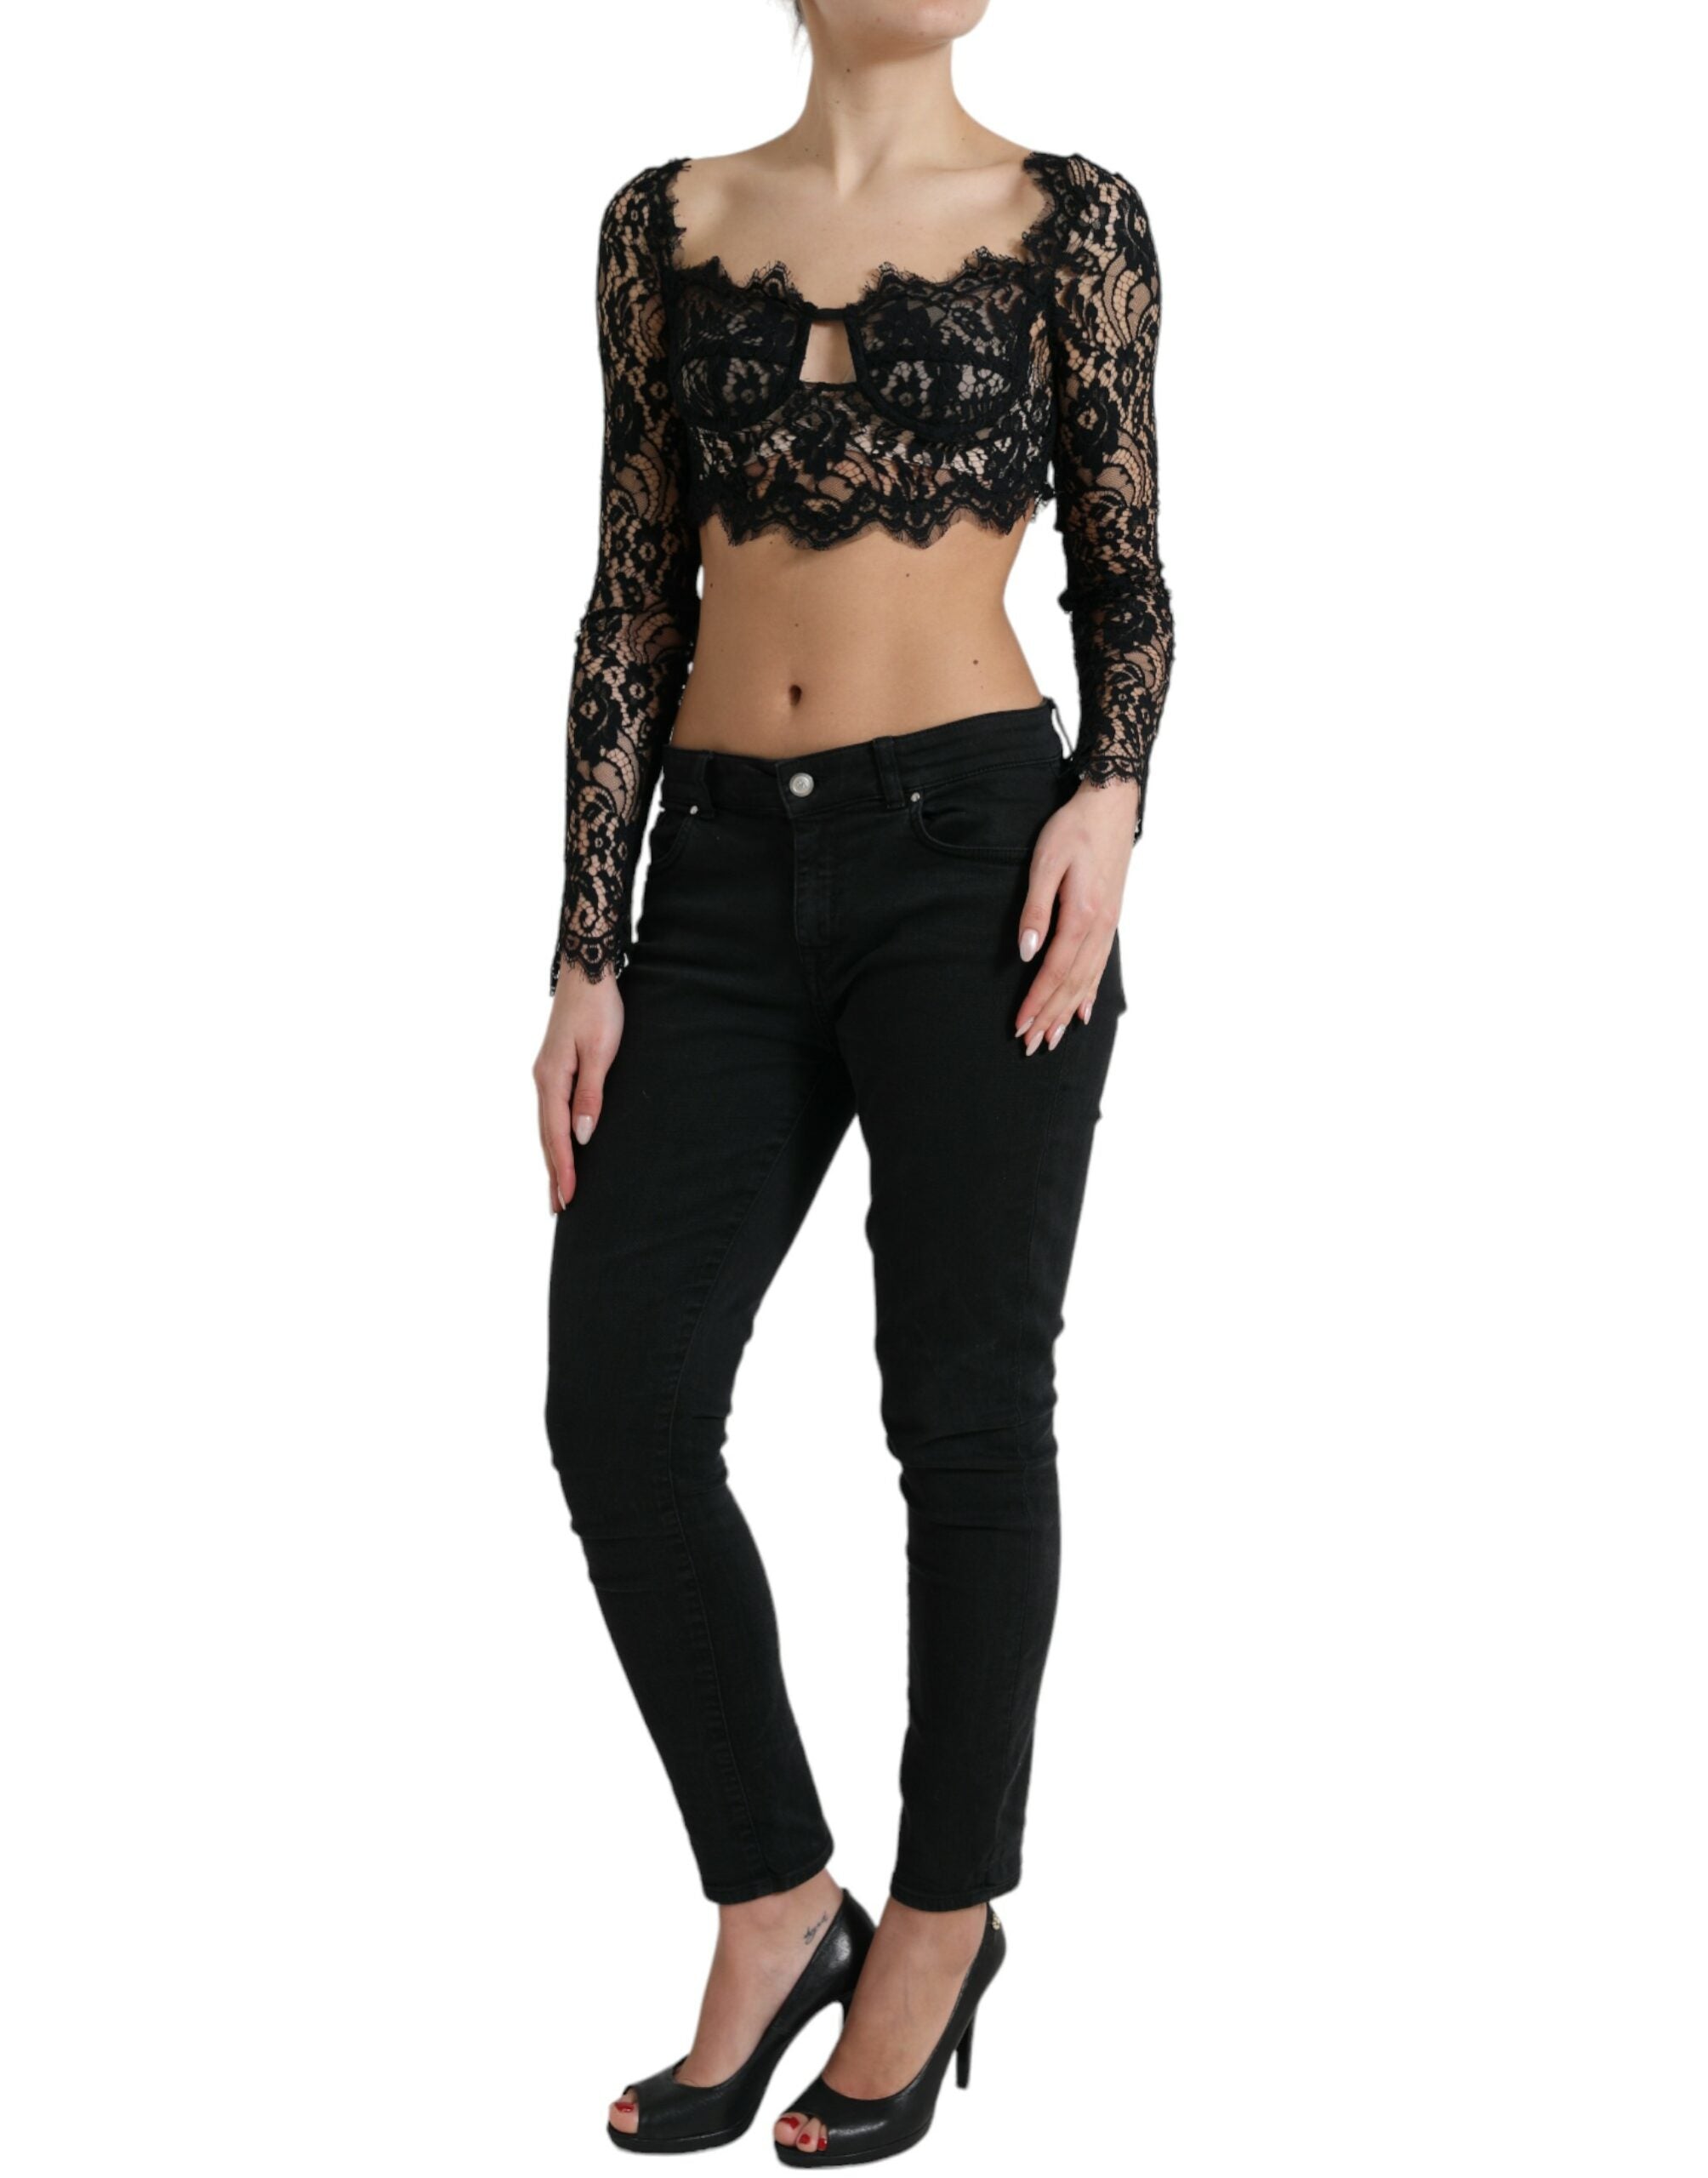 Dolce & Gabbana Elegant Lace Bustier Cropped Top